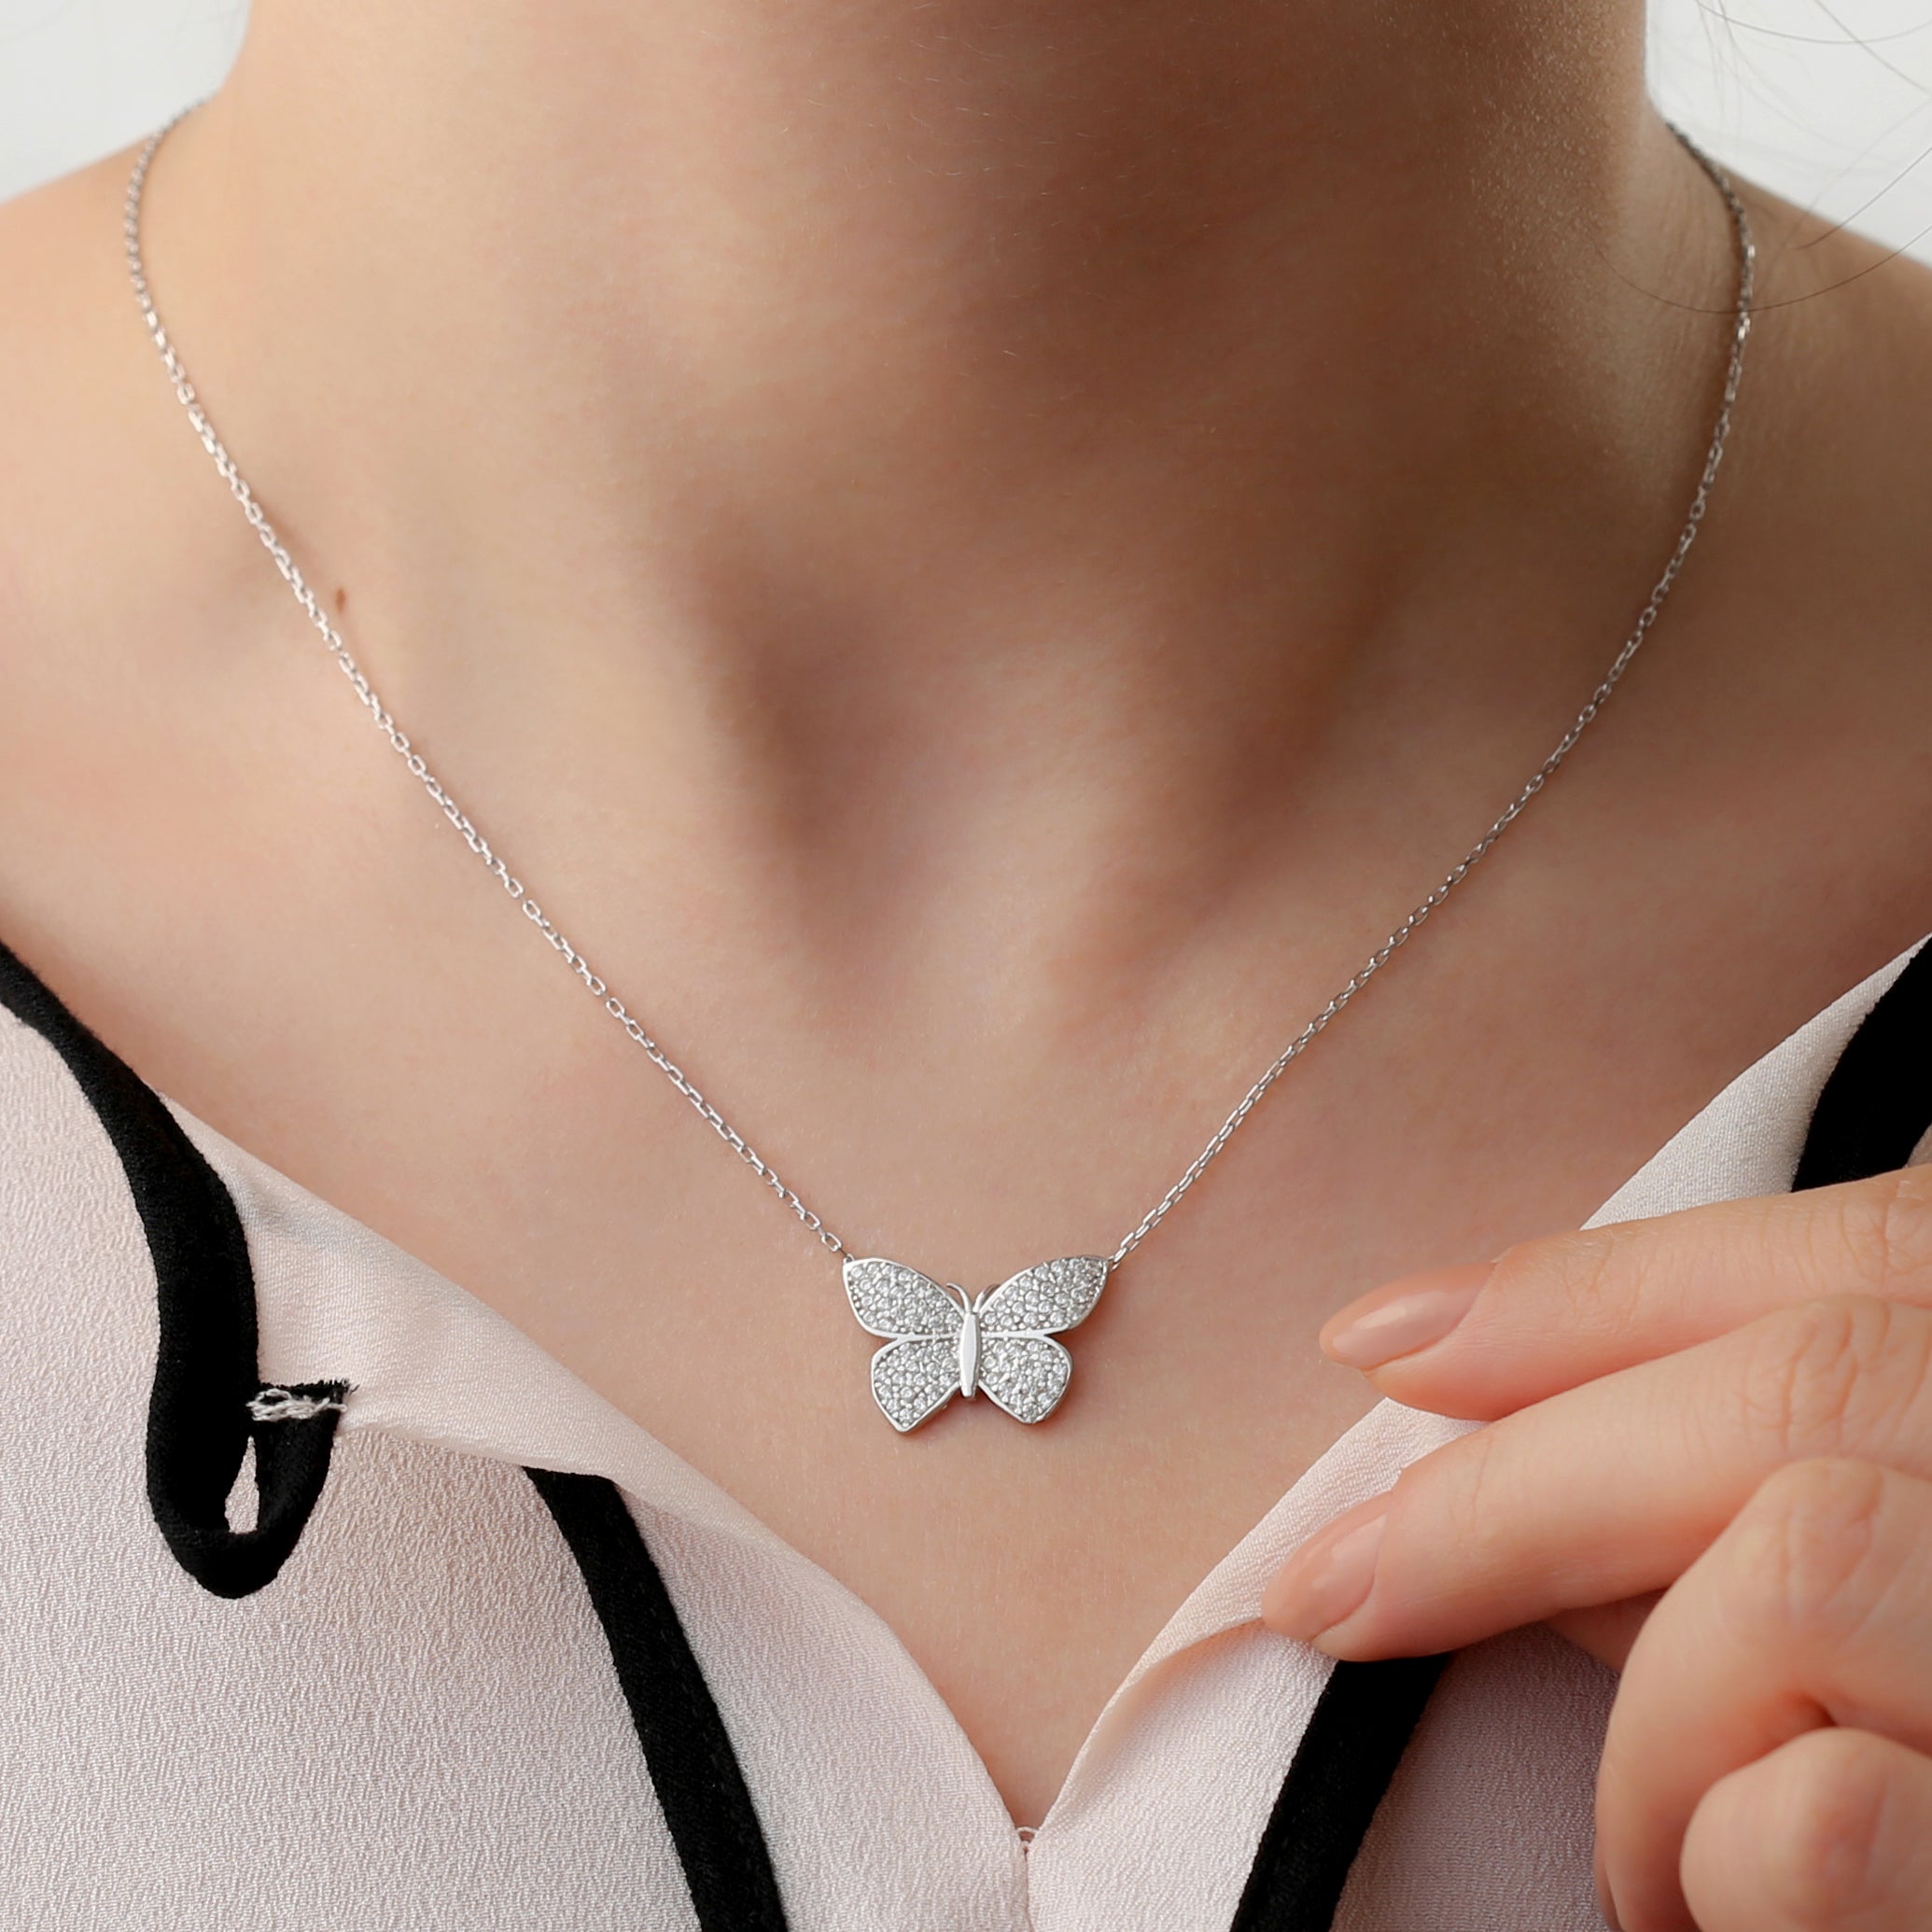 Line Art Butterfly Necklace - Silver Women's Necklaces